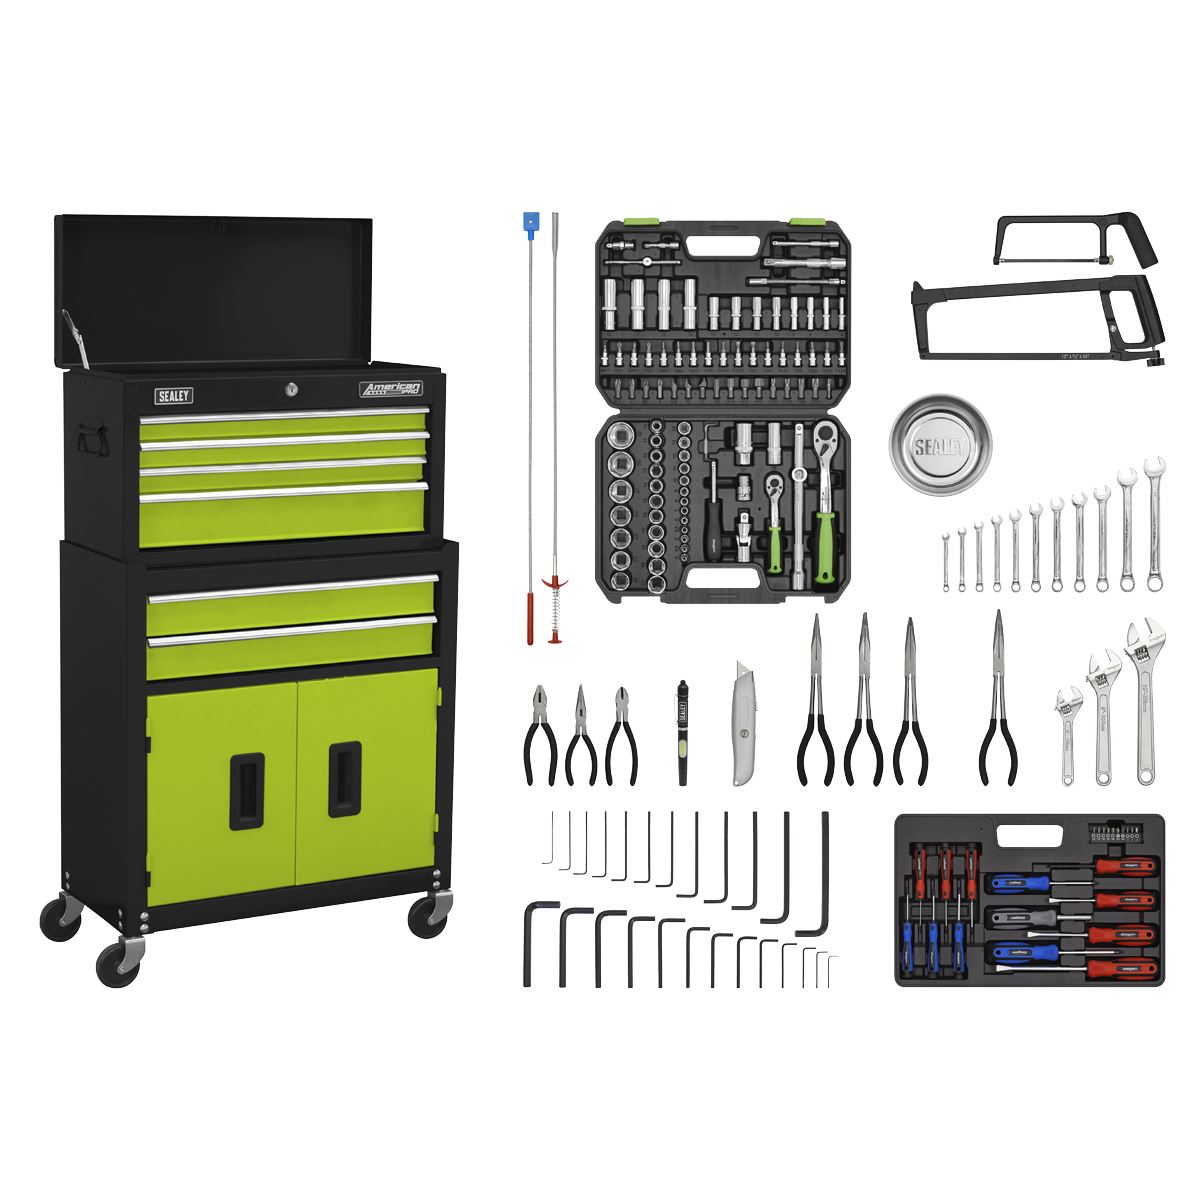 Sealey American Pro Topchest & Rollcab Combination 6 Drawer with Ball-Bearing Slides - Green/Black & 170pc Tool Kit